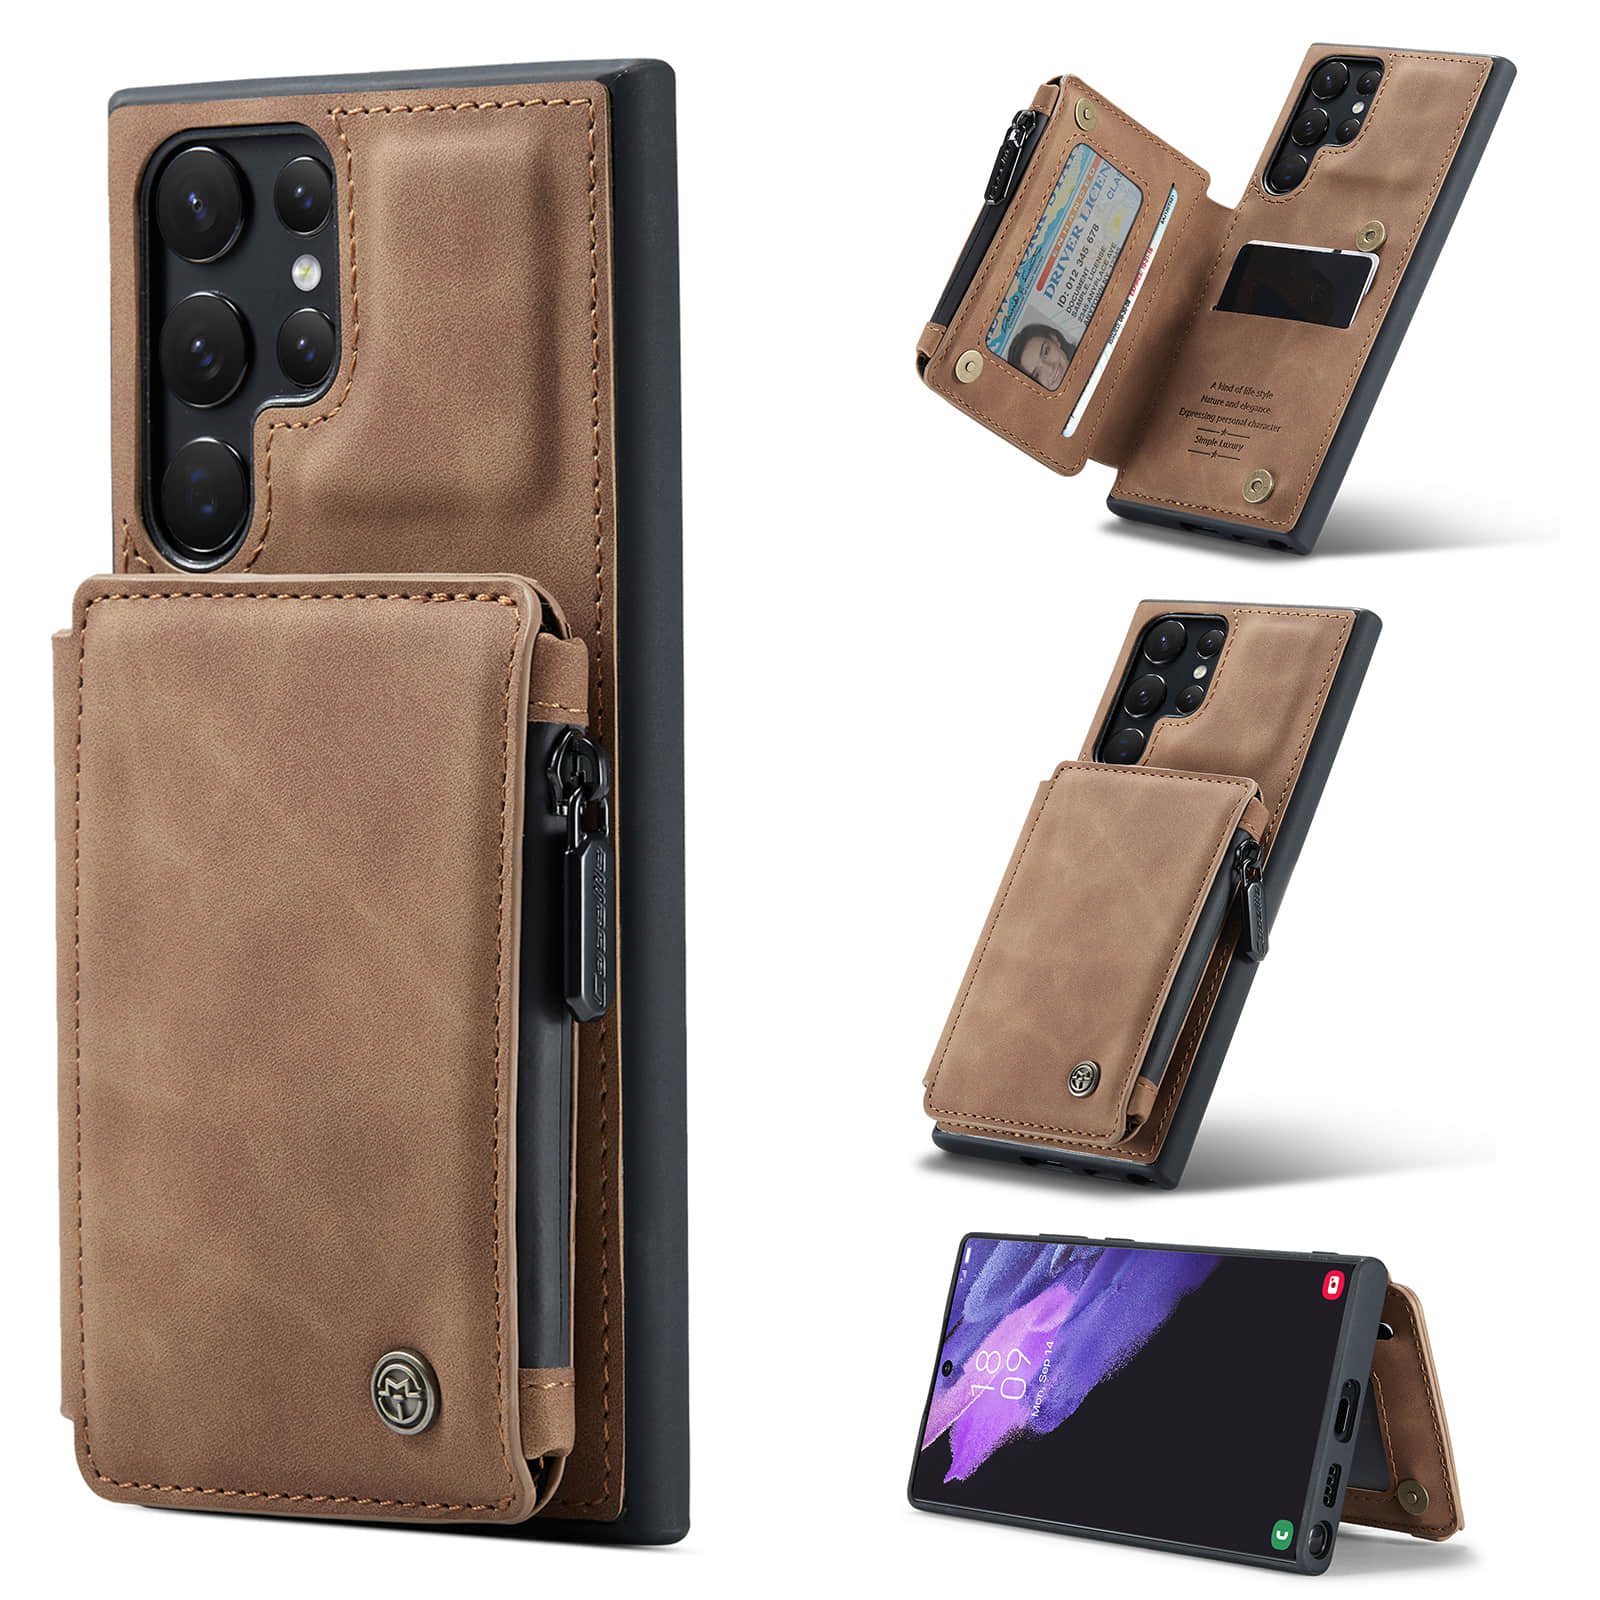 Caeouts Zipper Cardholder Wallet Phone Case Brown